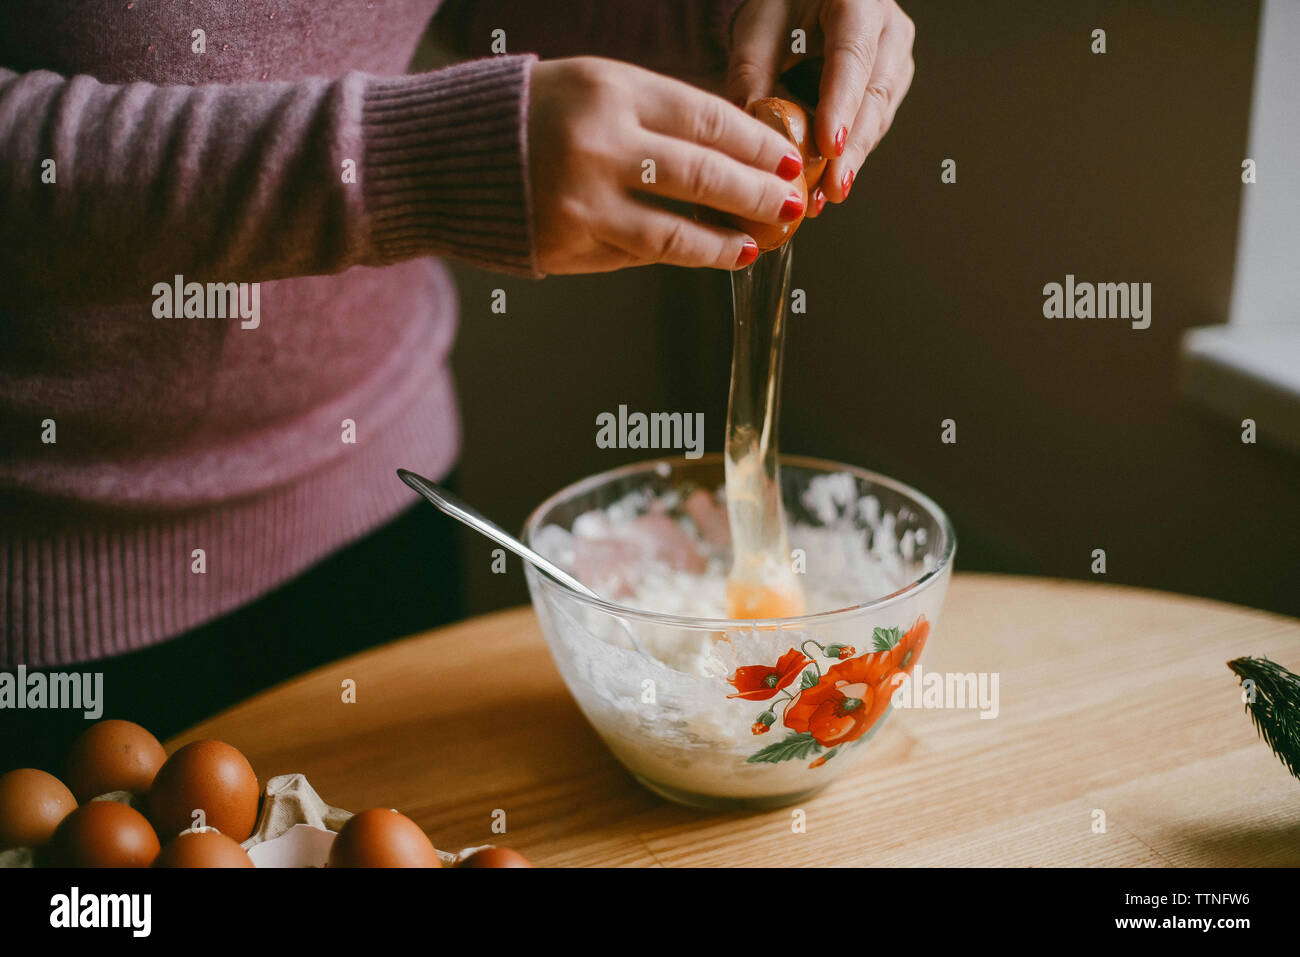 https://c8.alamy.com/comp/TTNFW6/midsection-of-woman-breaking-egg-in-bowl-on-wooden-table-at-home-TTNFW6.jpg